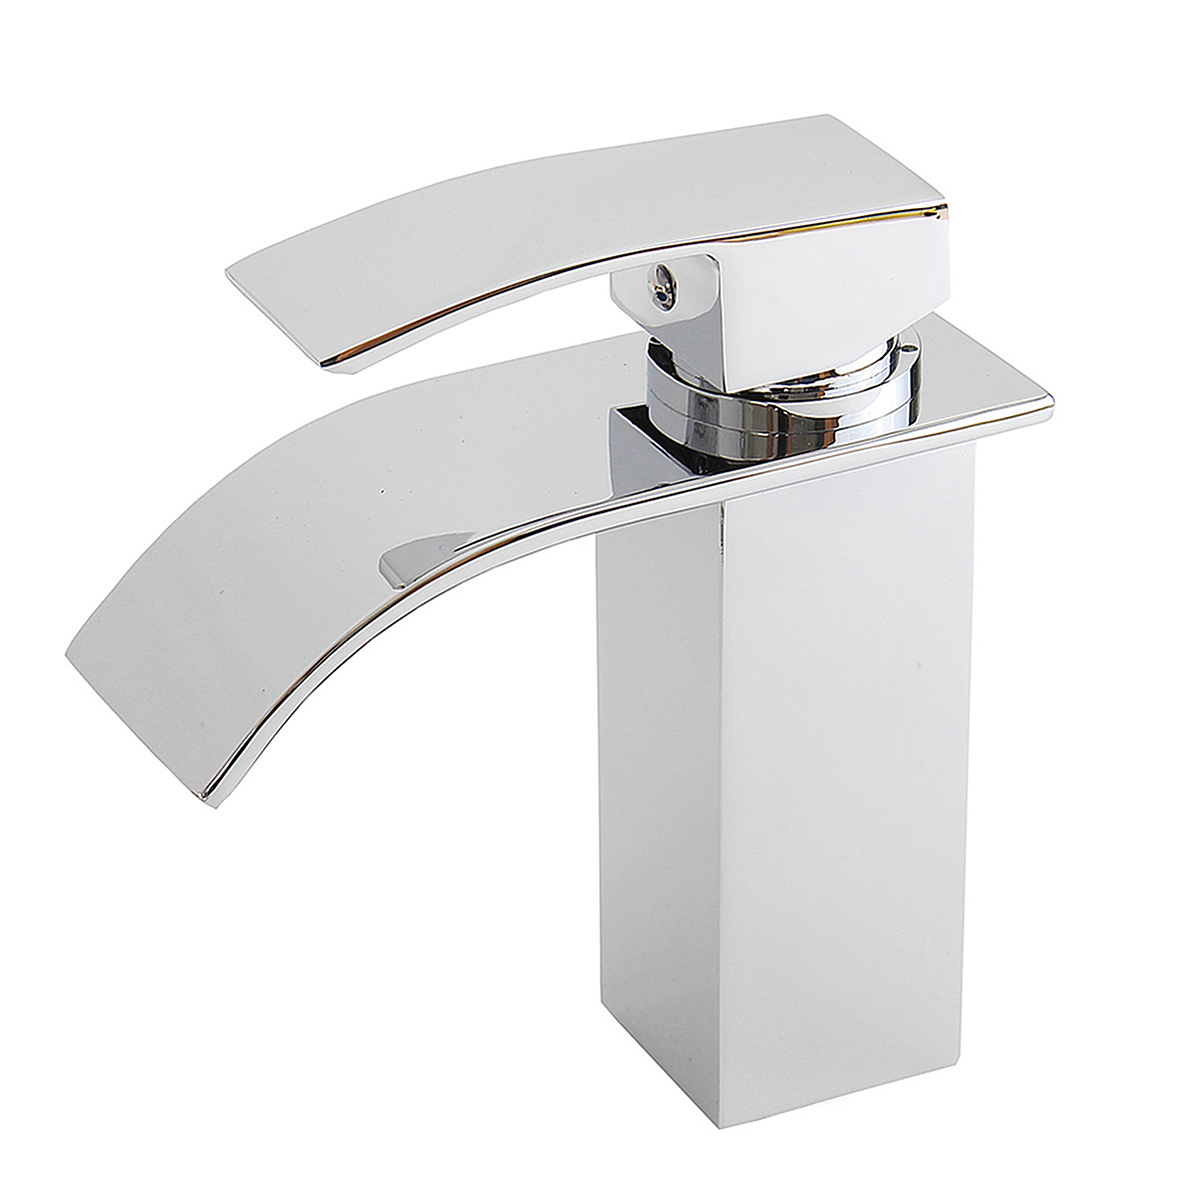 Bathroom-Sink-Faucet-Ordinary-Copper-Waterfall-Single-style-Hot-And-Cold-Mixer-Tap-1182114